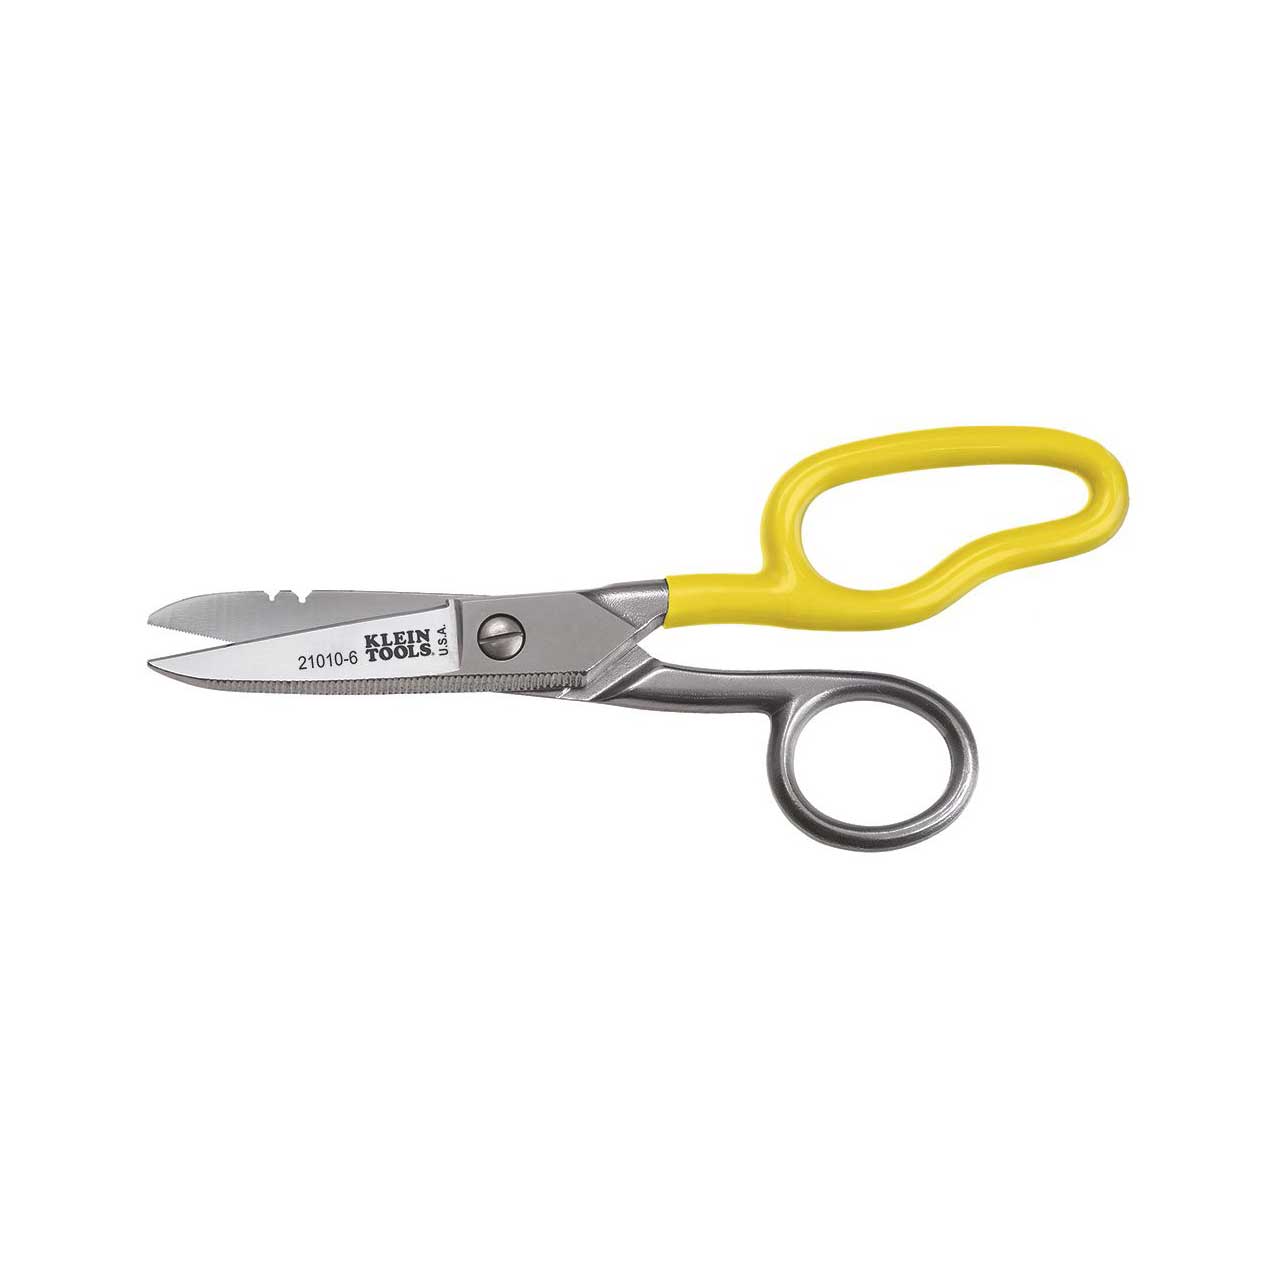 Klein 21010-6-SEN Free-Fall Snip Shears for Cordage / Cable and Wire - Scraper / File / Serrated Blades 21010-6-SEN